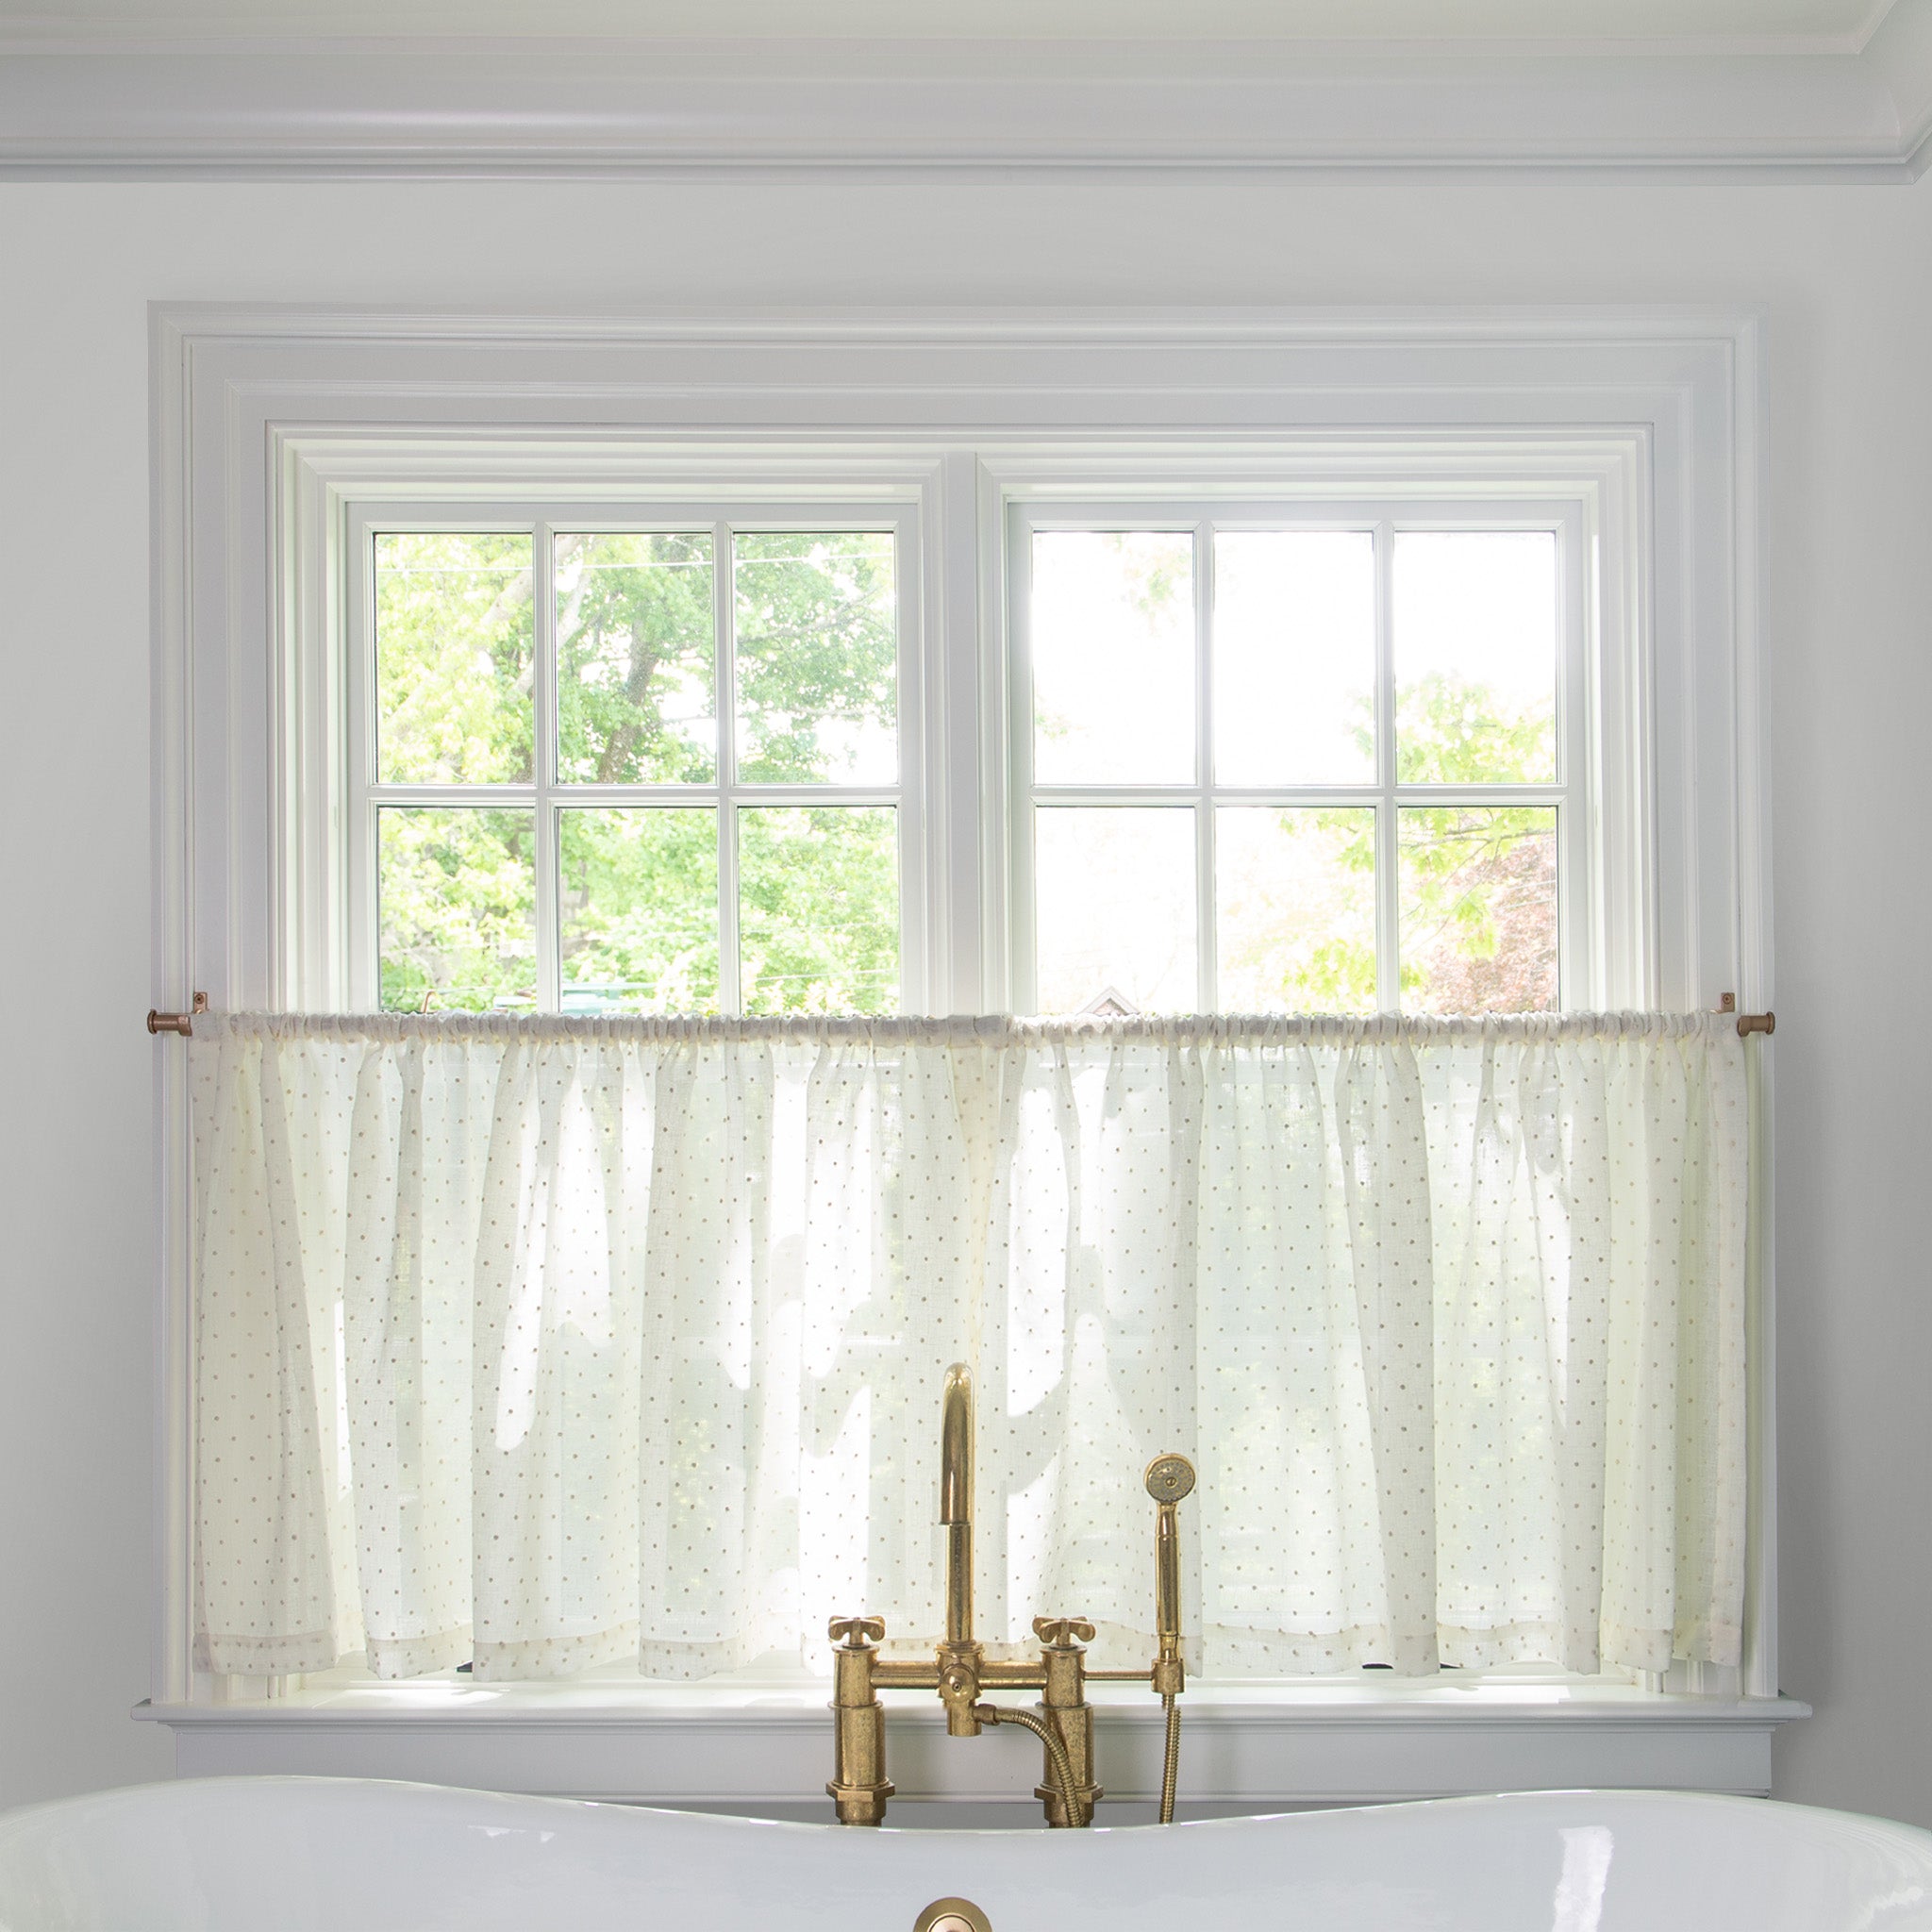 white sheer curtain with neutral embroidered polka dots on a metal rod in front of an illuminated window in a bathroom